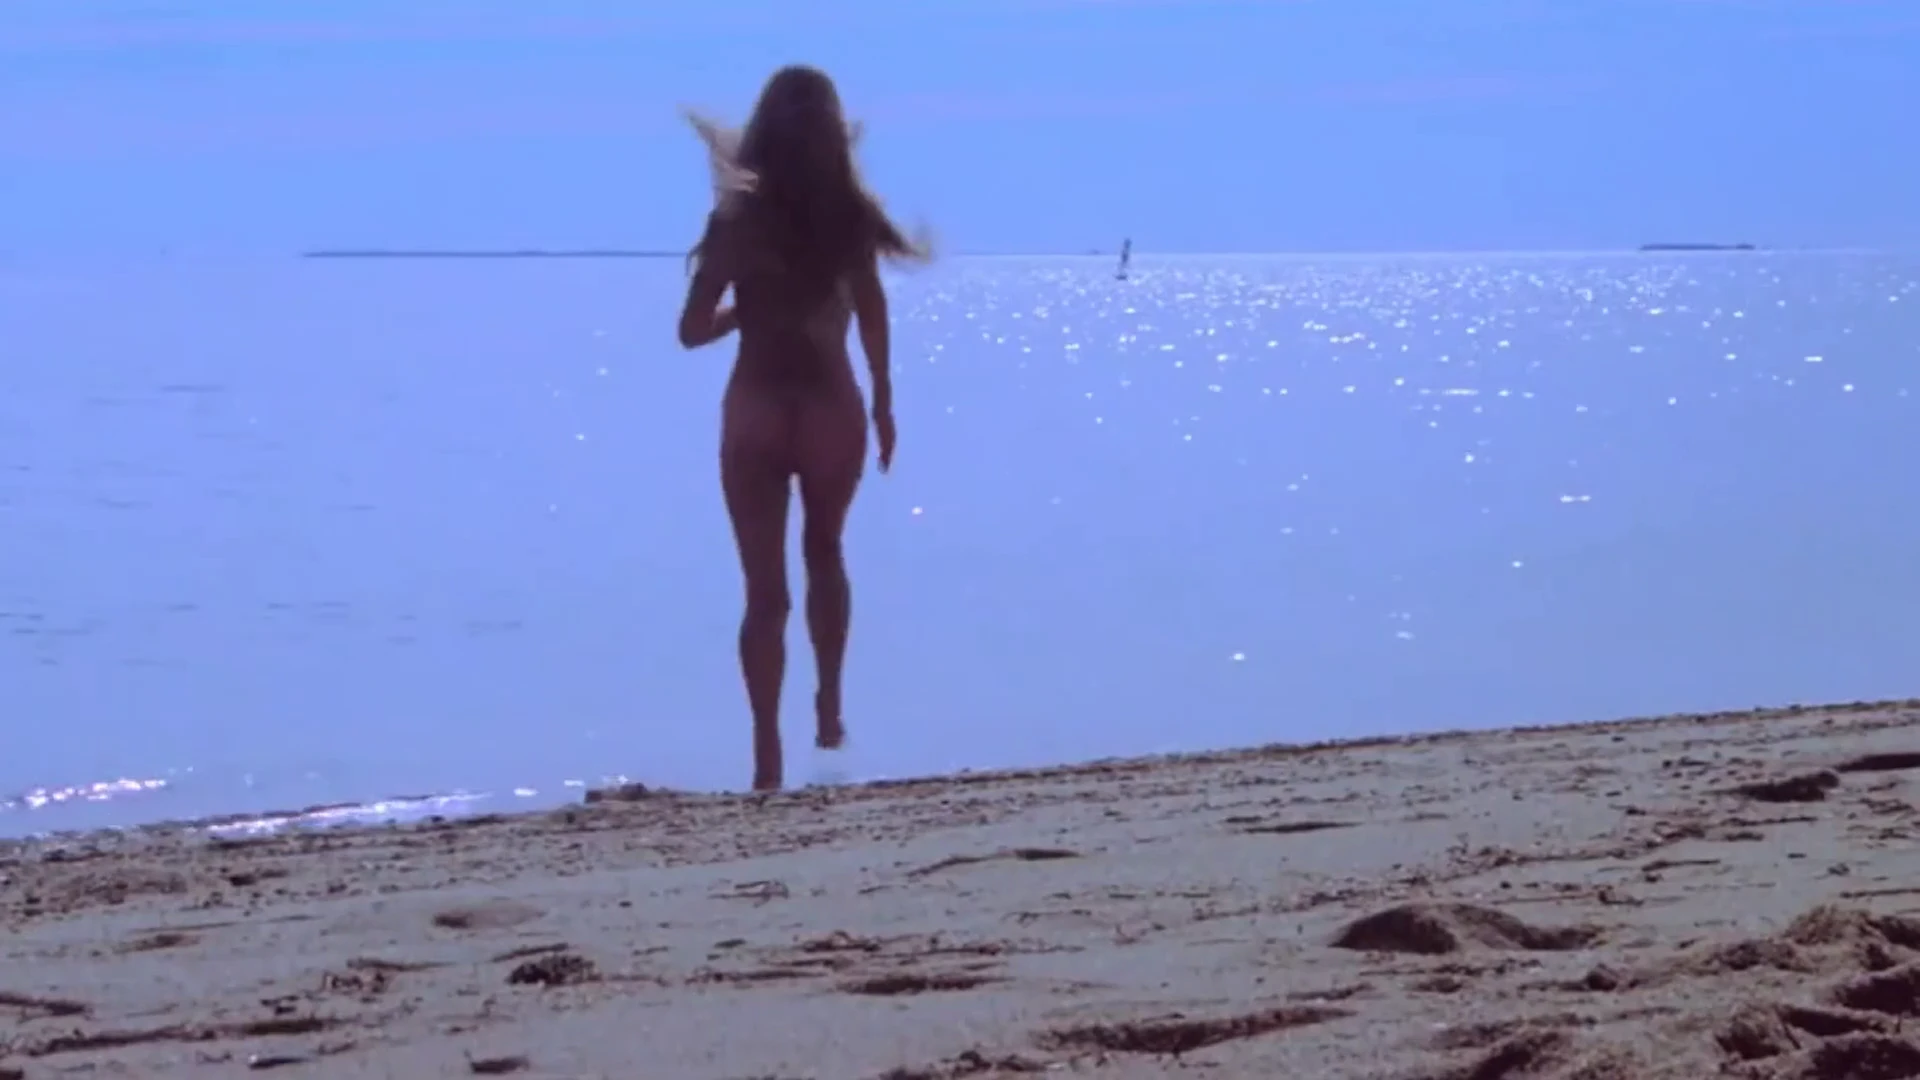 Jaws (1974), PG, Susan Backlinie (boobs, bush, and ass, all obscured but somewhat visible)